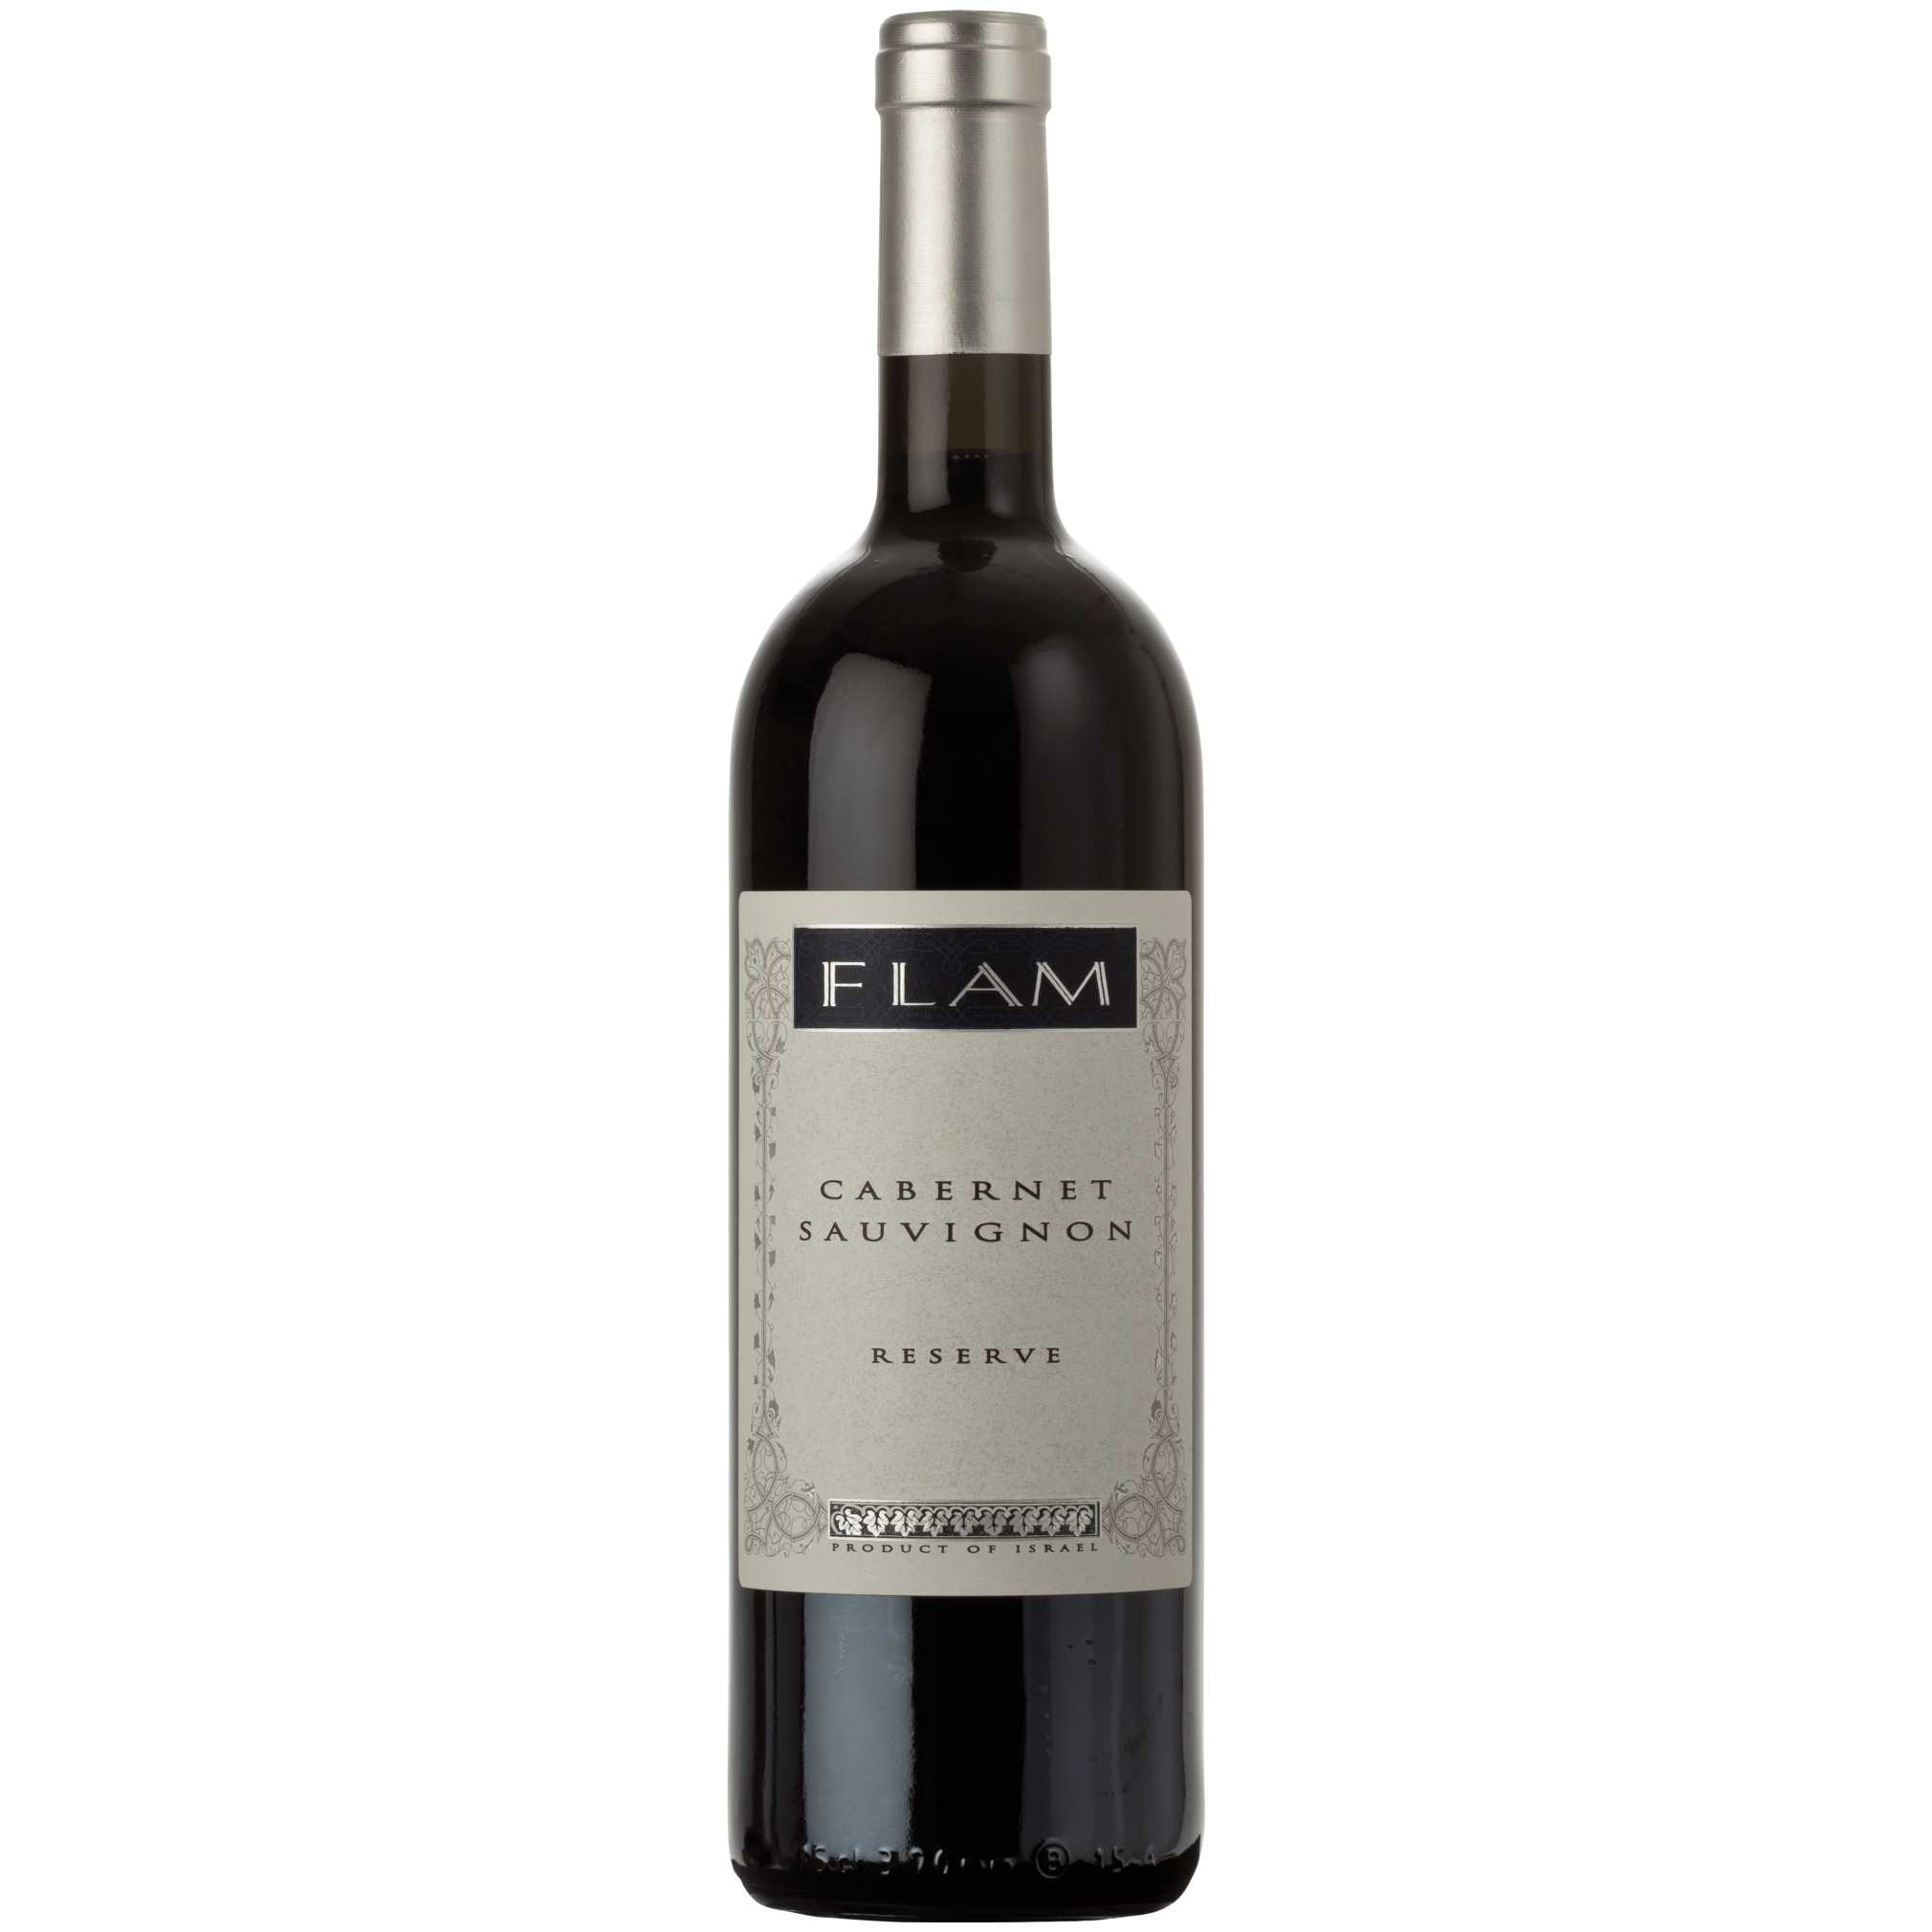 Flam Reserve Cabernet Sauvignon - A Kosher Wine From Israel